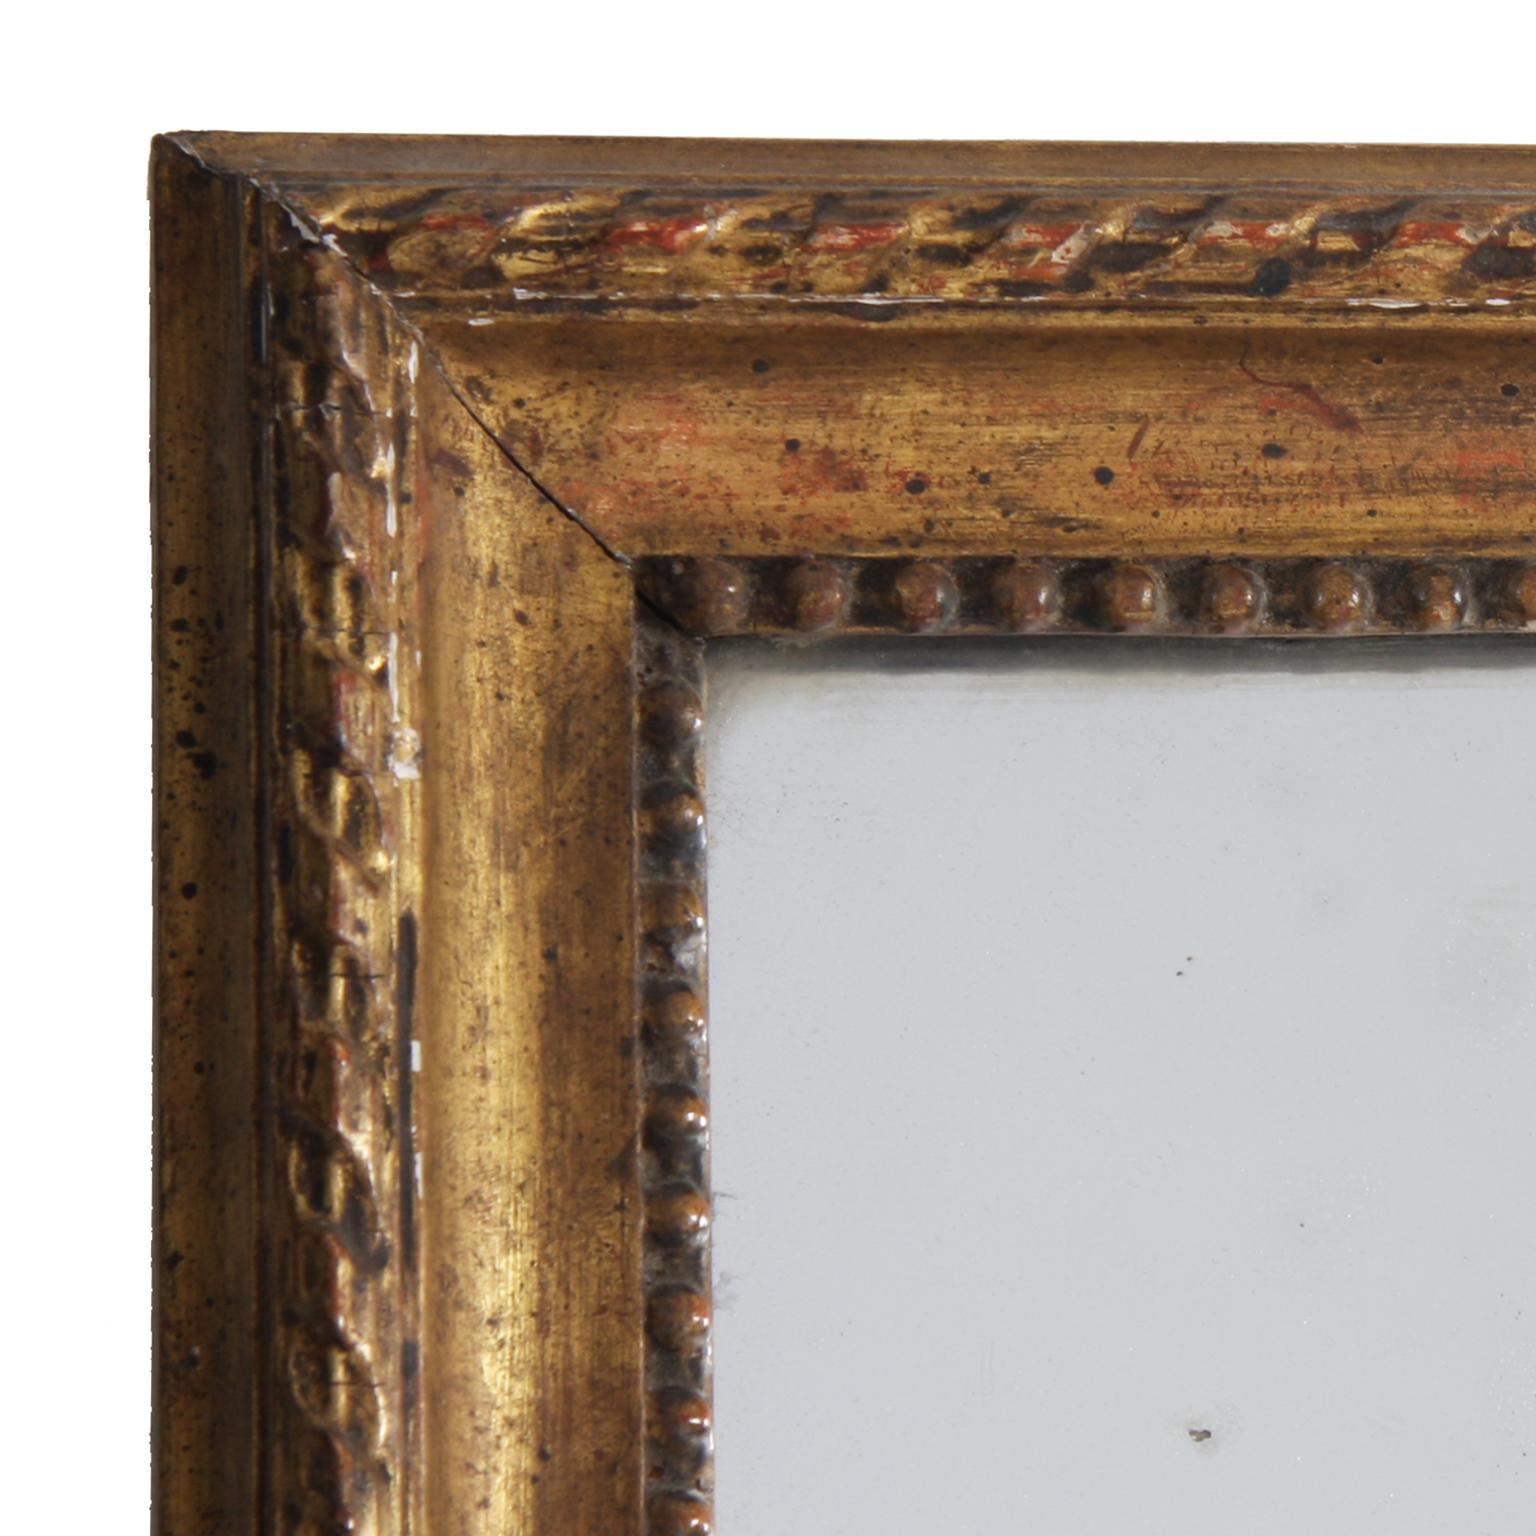 Early 20th Century Swedish circa 1900 Giltwood Overmantle Mirror with Crest and Mercury Glass